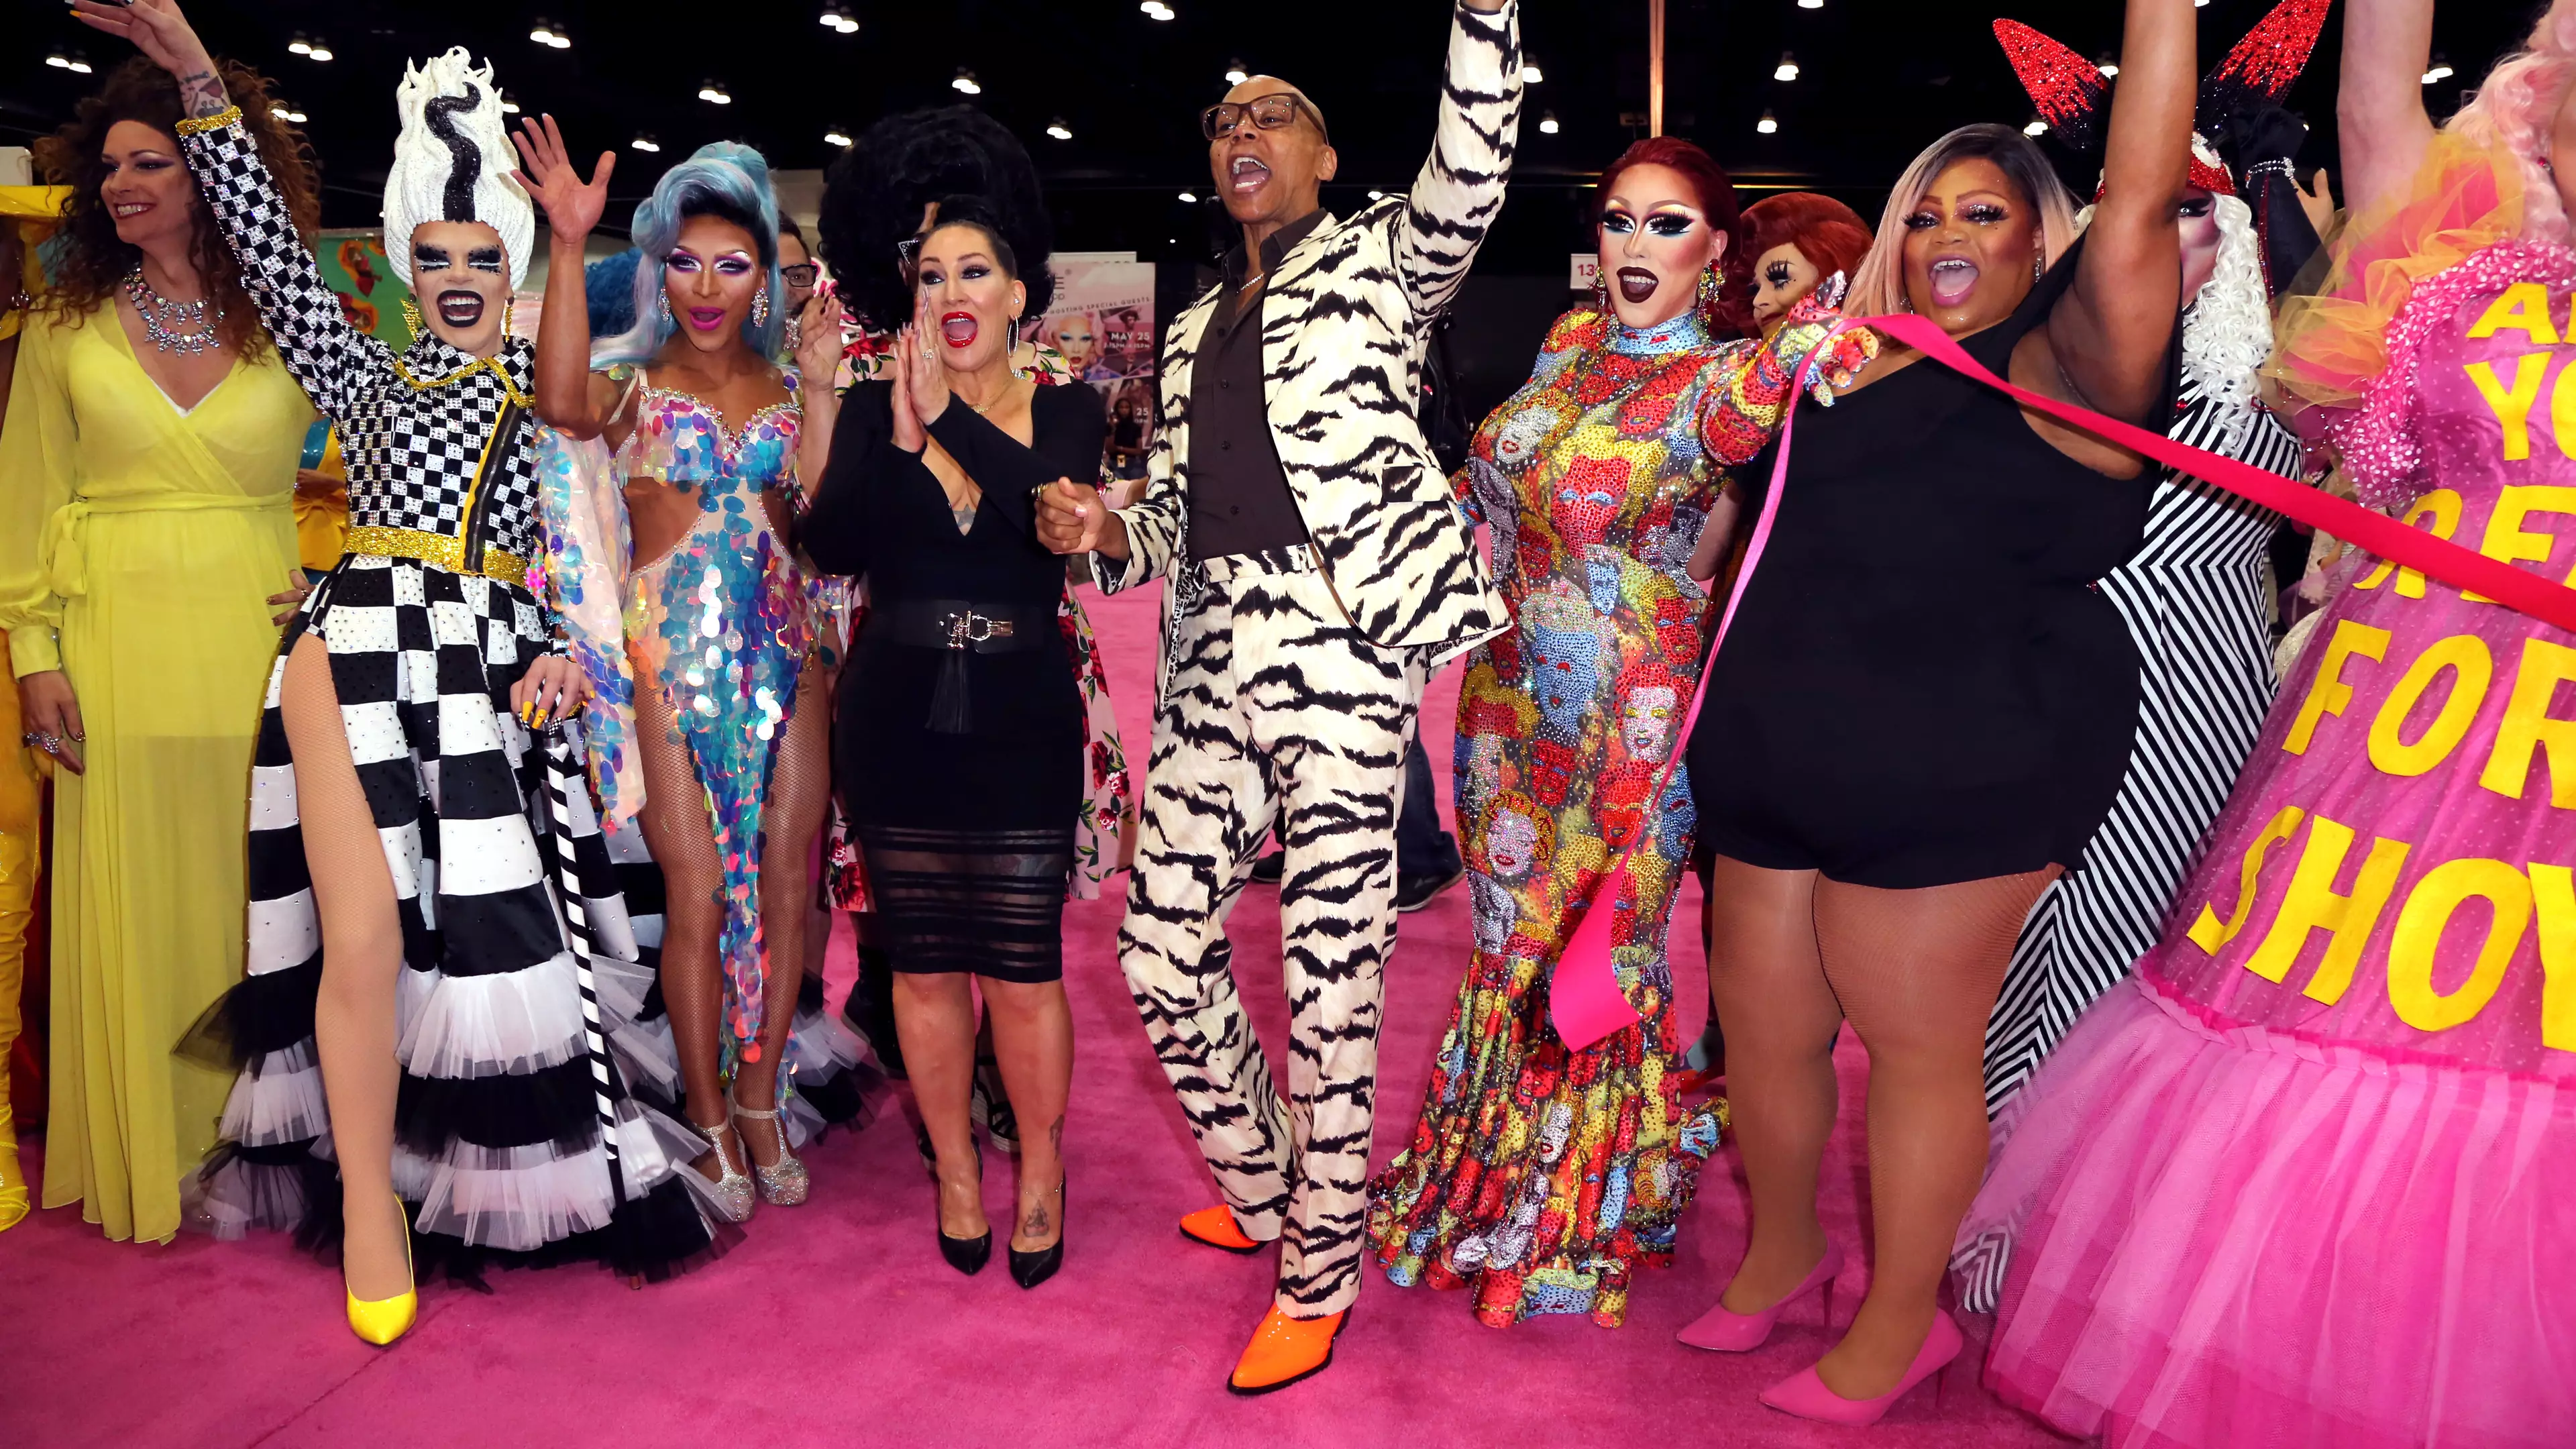 A RuPaul's Drag Race Festival Is Coming To The UK